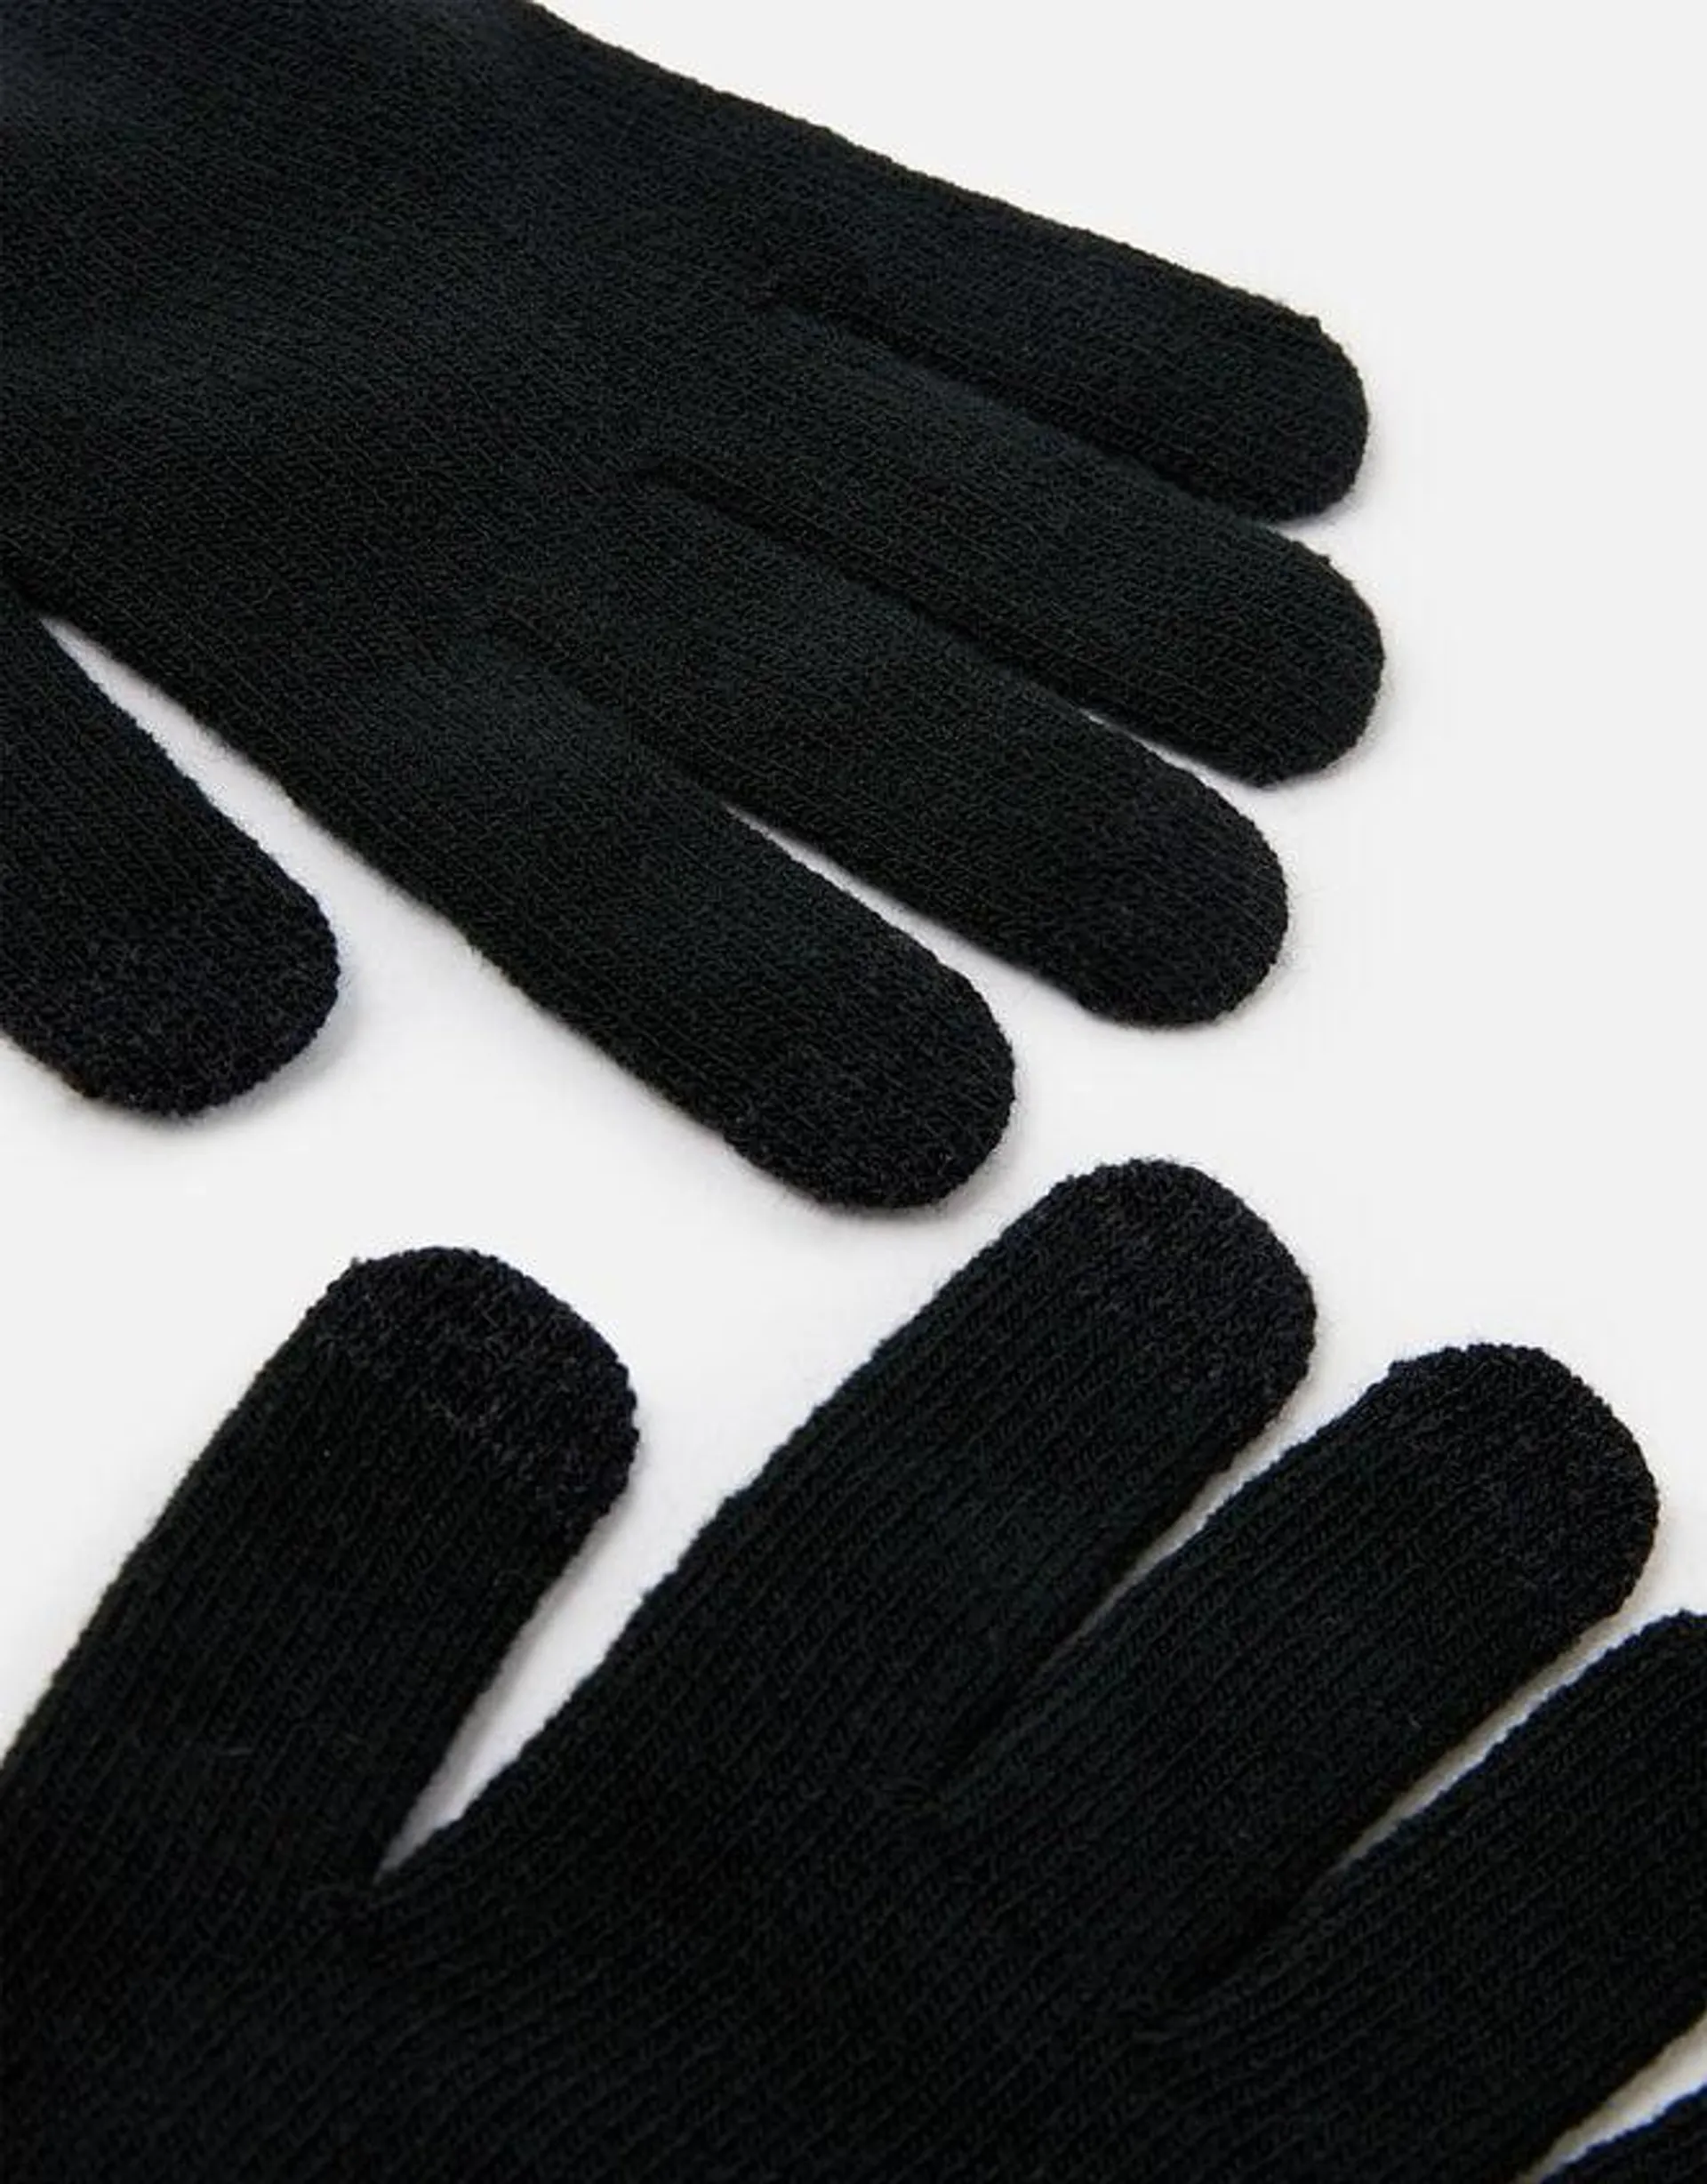 Super-Stretchy Touchscreen Gloves